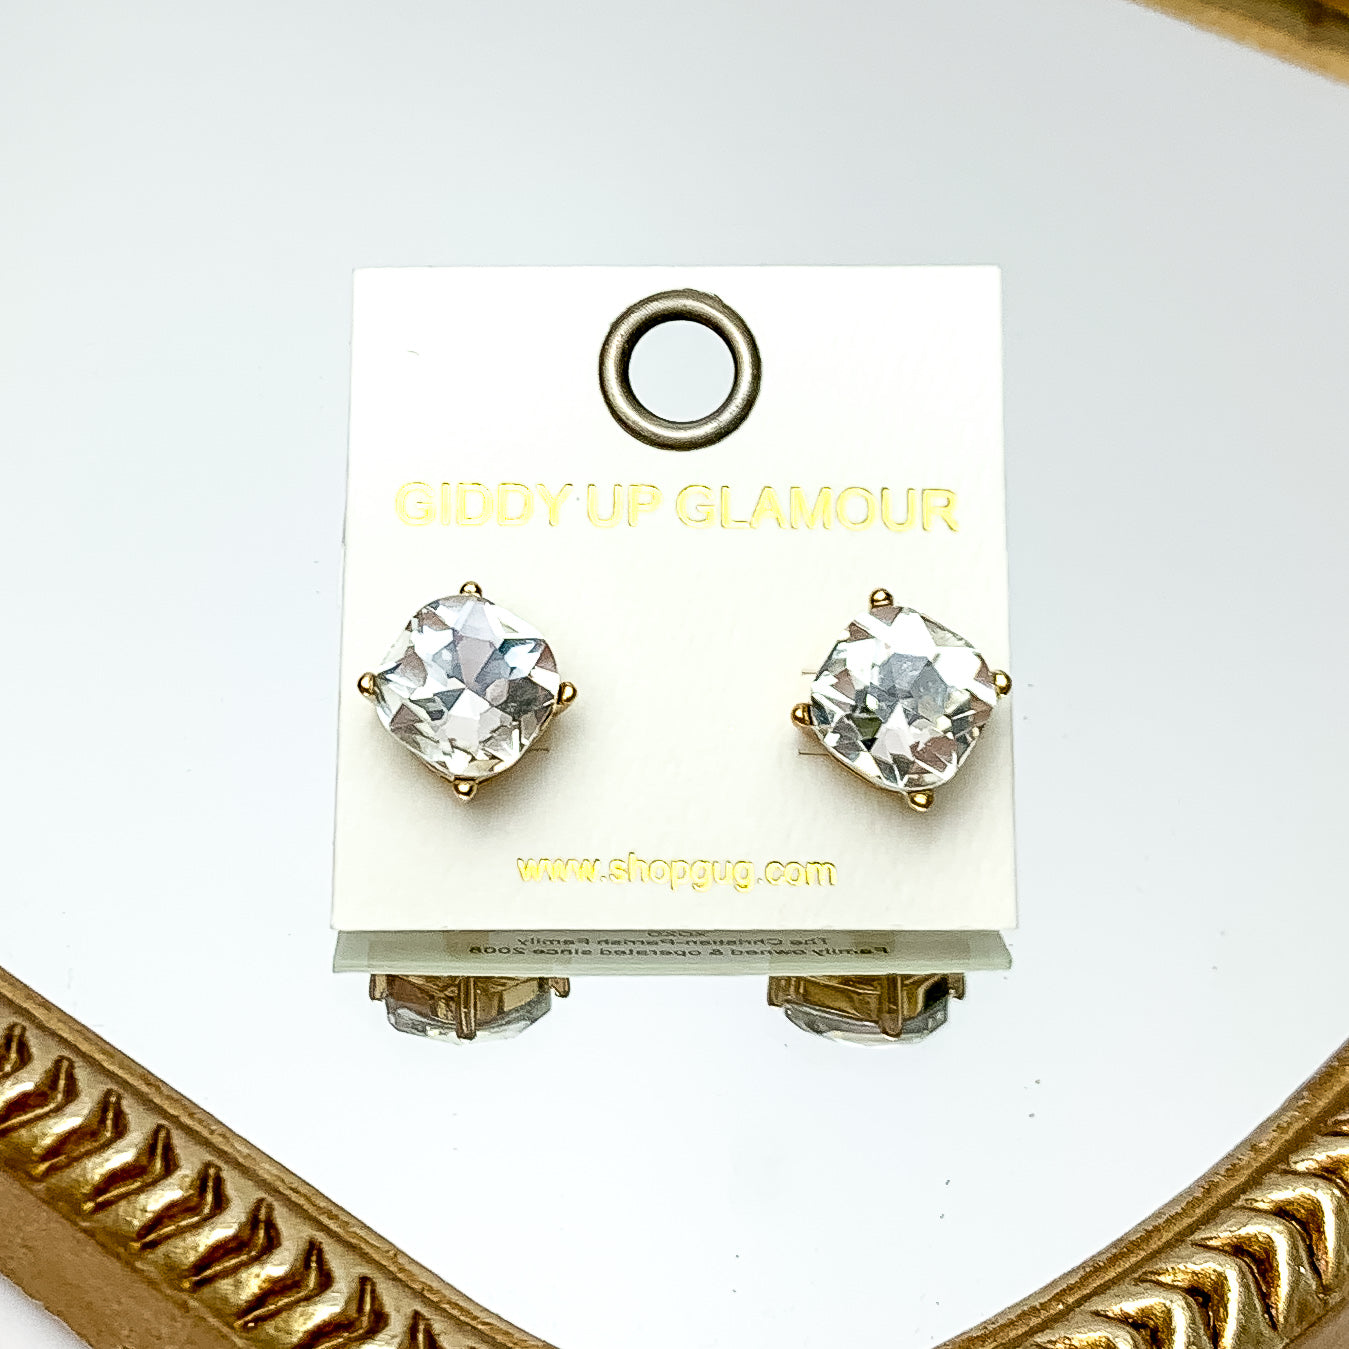 Large Clear Crystal Stud Earrings in Gold Tone. These earrings are pictured laying on a gold trimmed mirror.